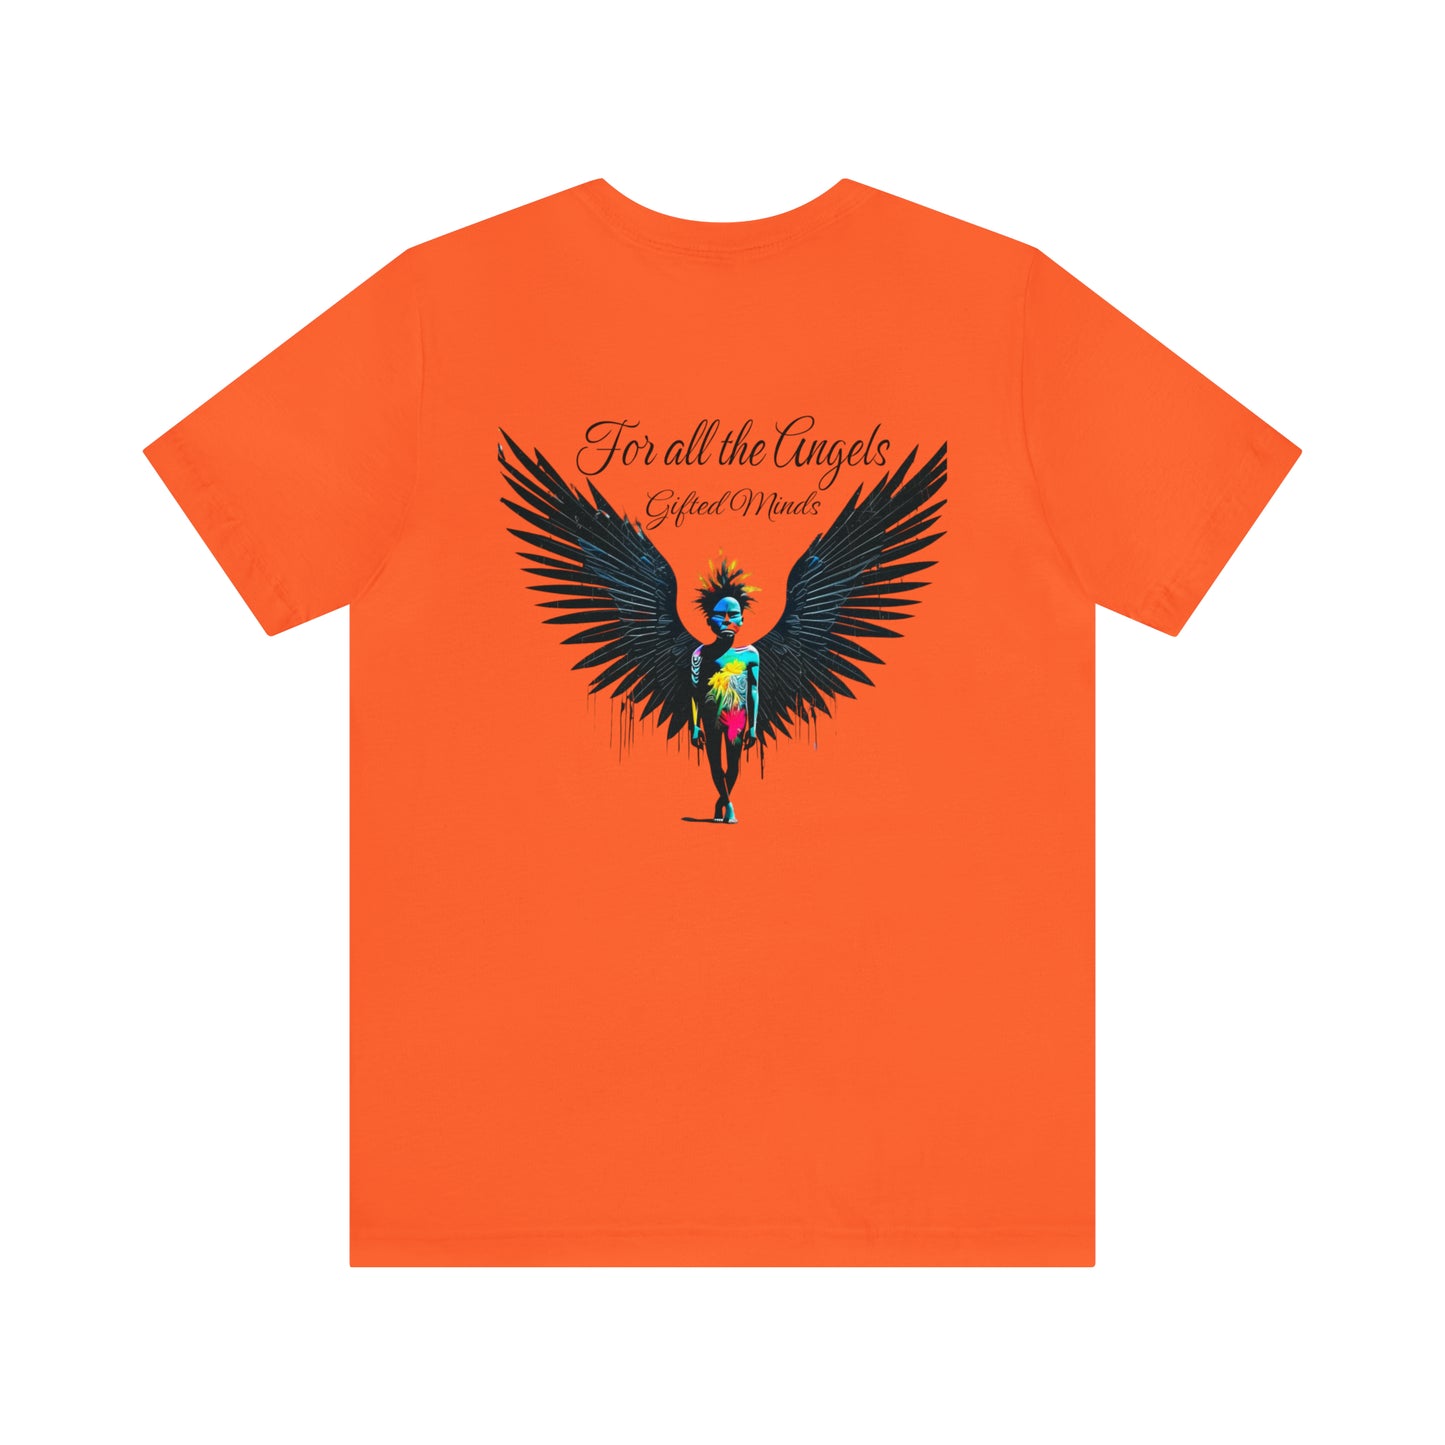 For all the Angels Short Sleeve Tee - GFTD MNDS